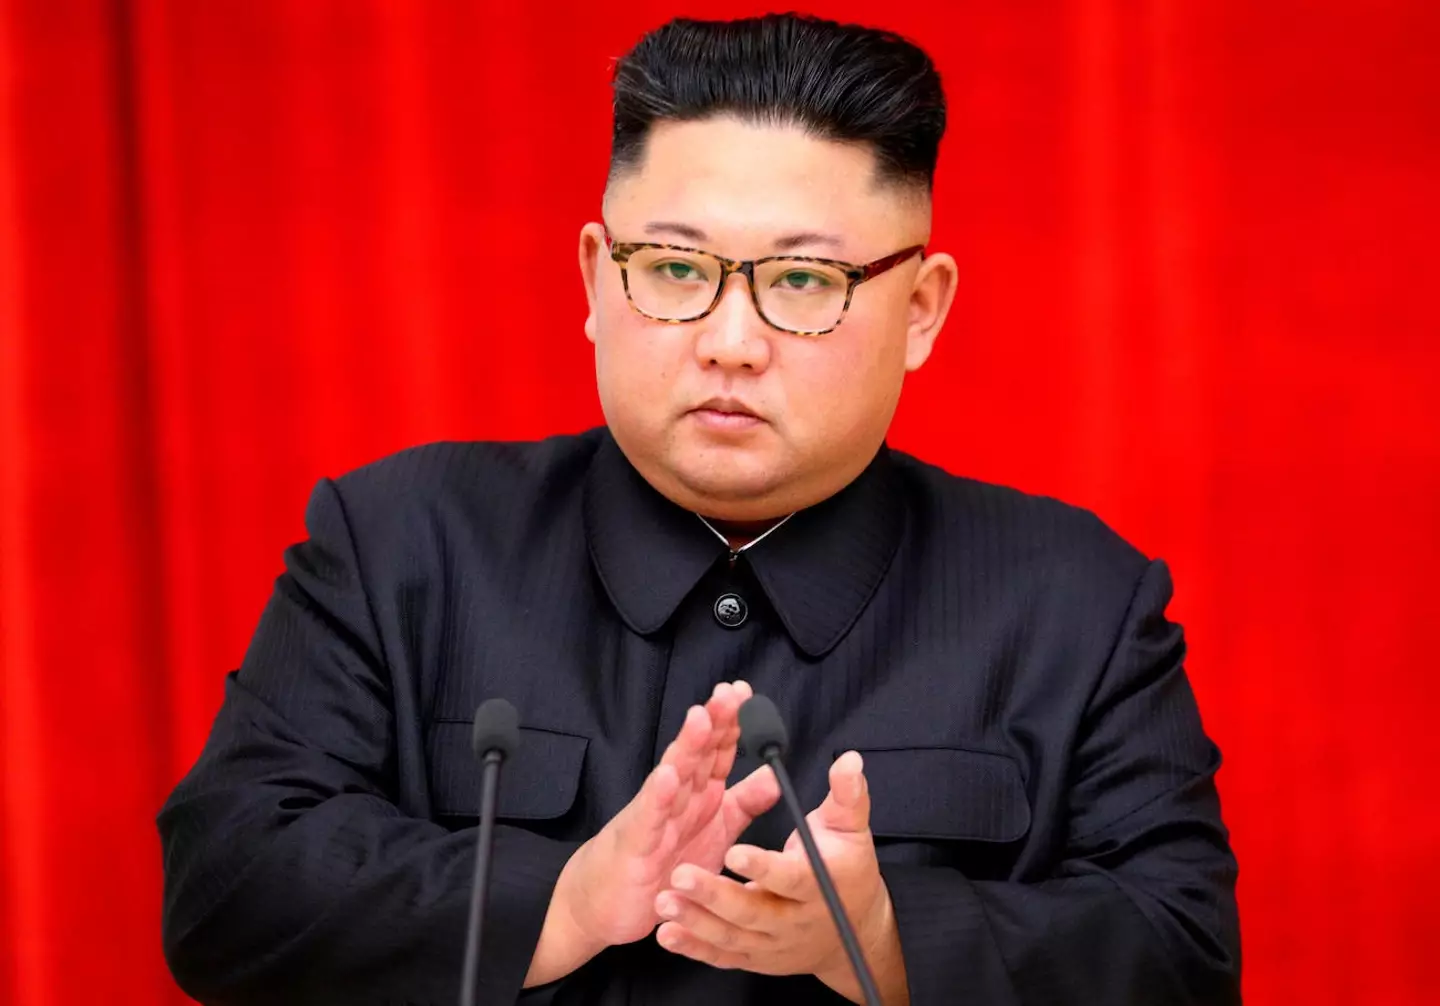 'Capitalist fashion' is strictly forbidden under Kim Jong-un's ruling.